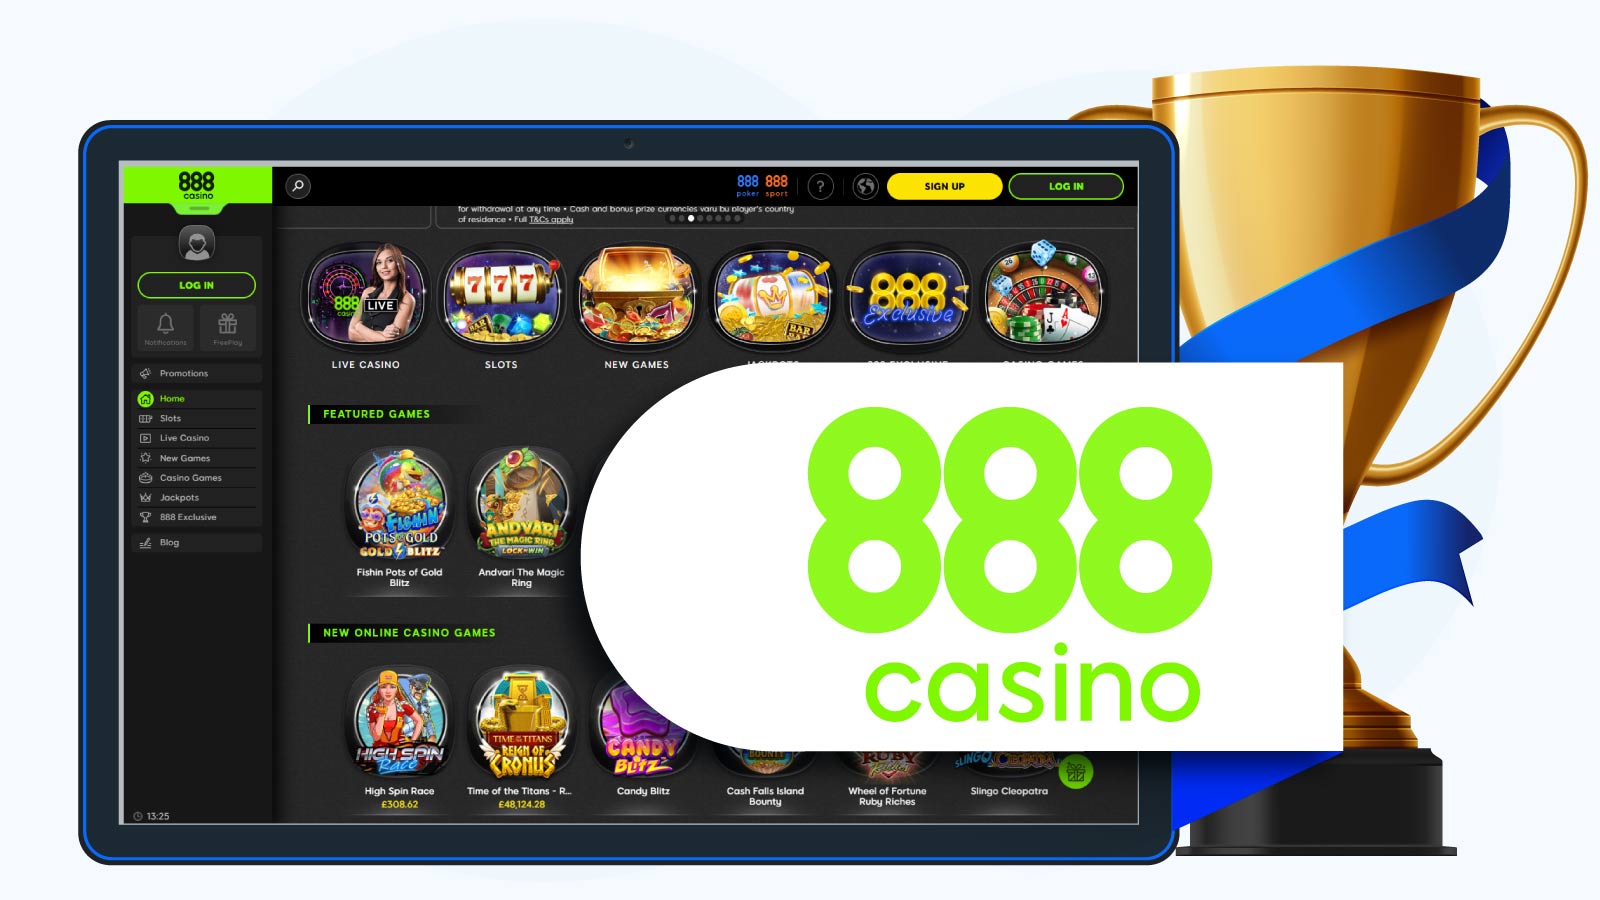 casino online Is Crucial To Your Business. Learn Why!